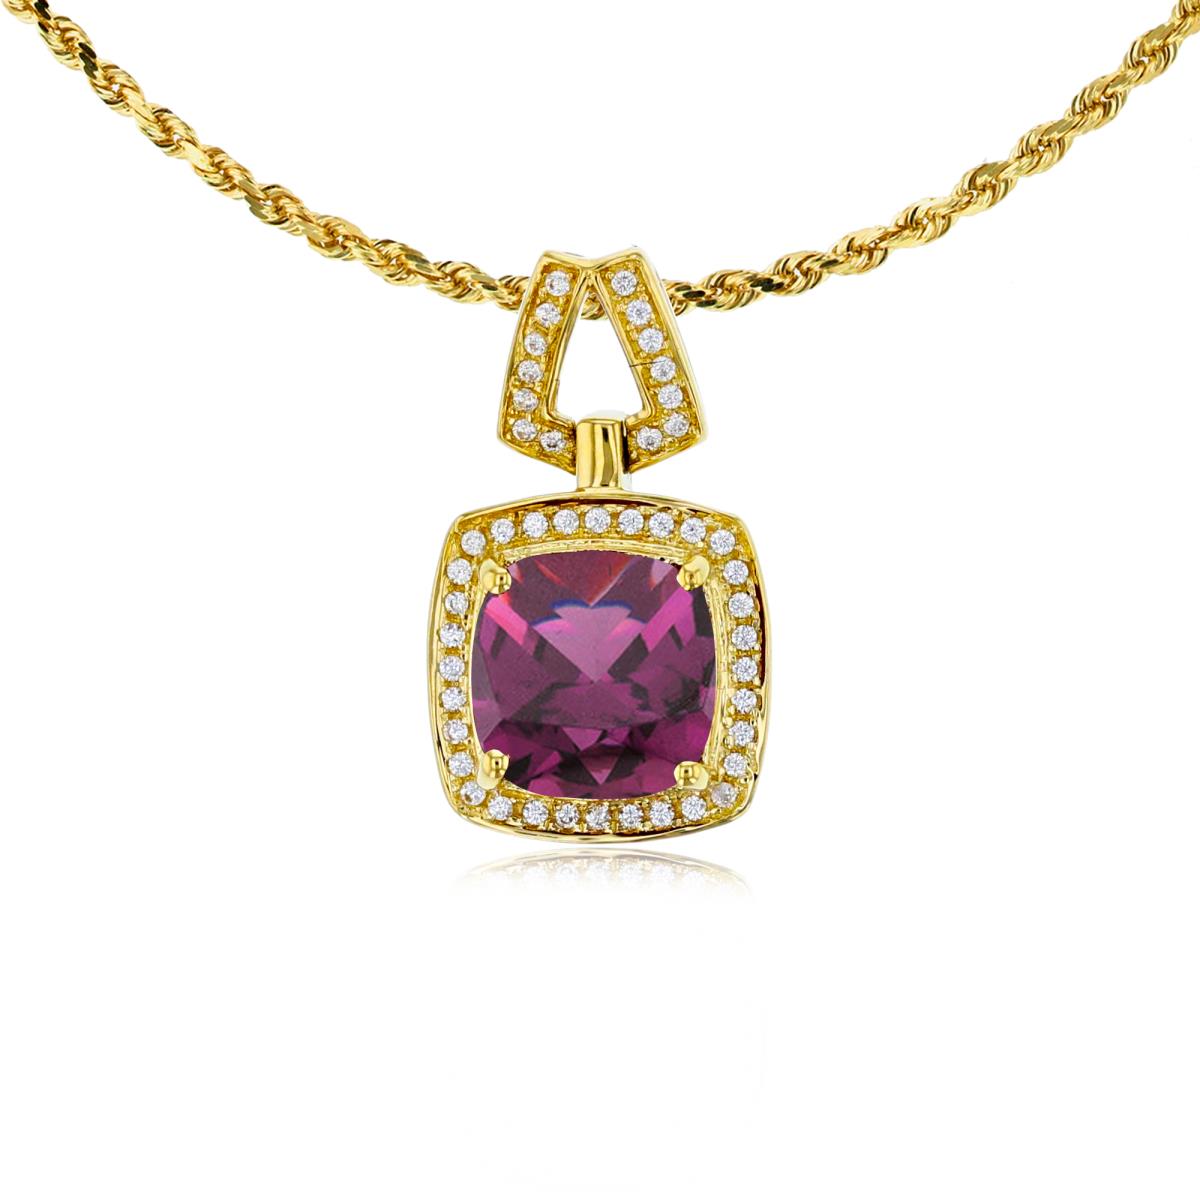 10K Yellow Gold 7mm Cushion Rhodolite & 0.10 CTTW Diamond Halo 18" Rope Chain Necklace